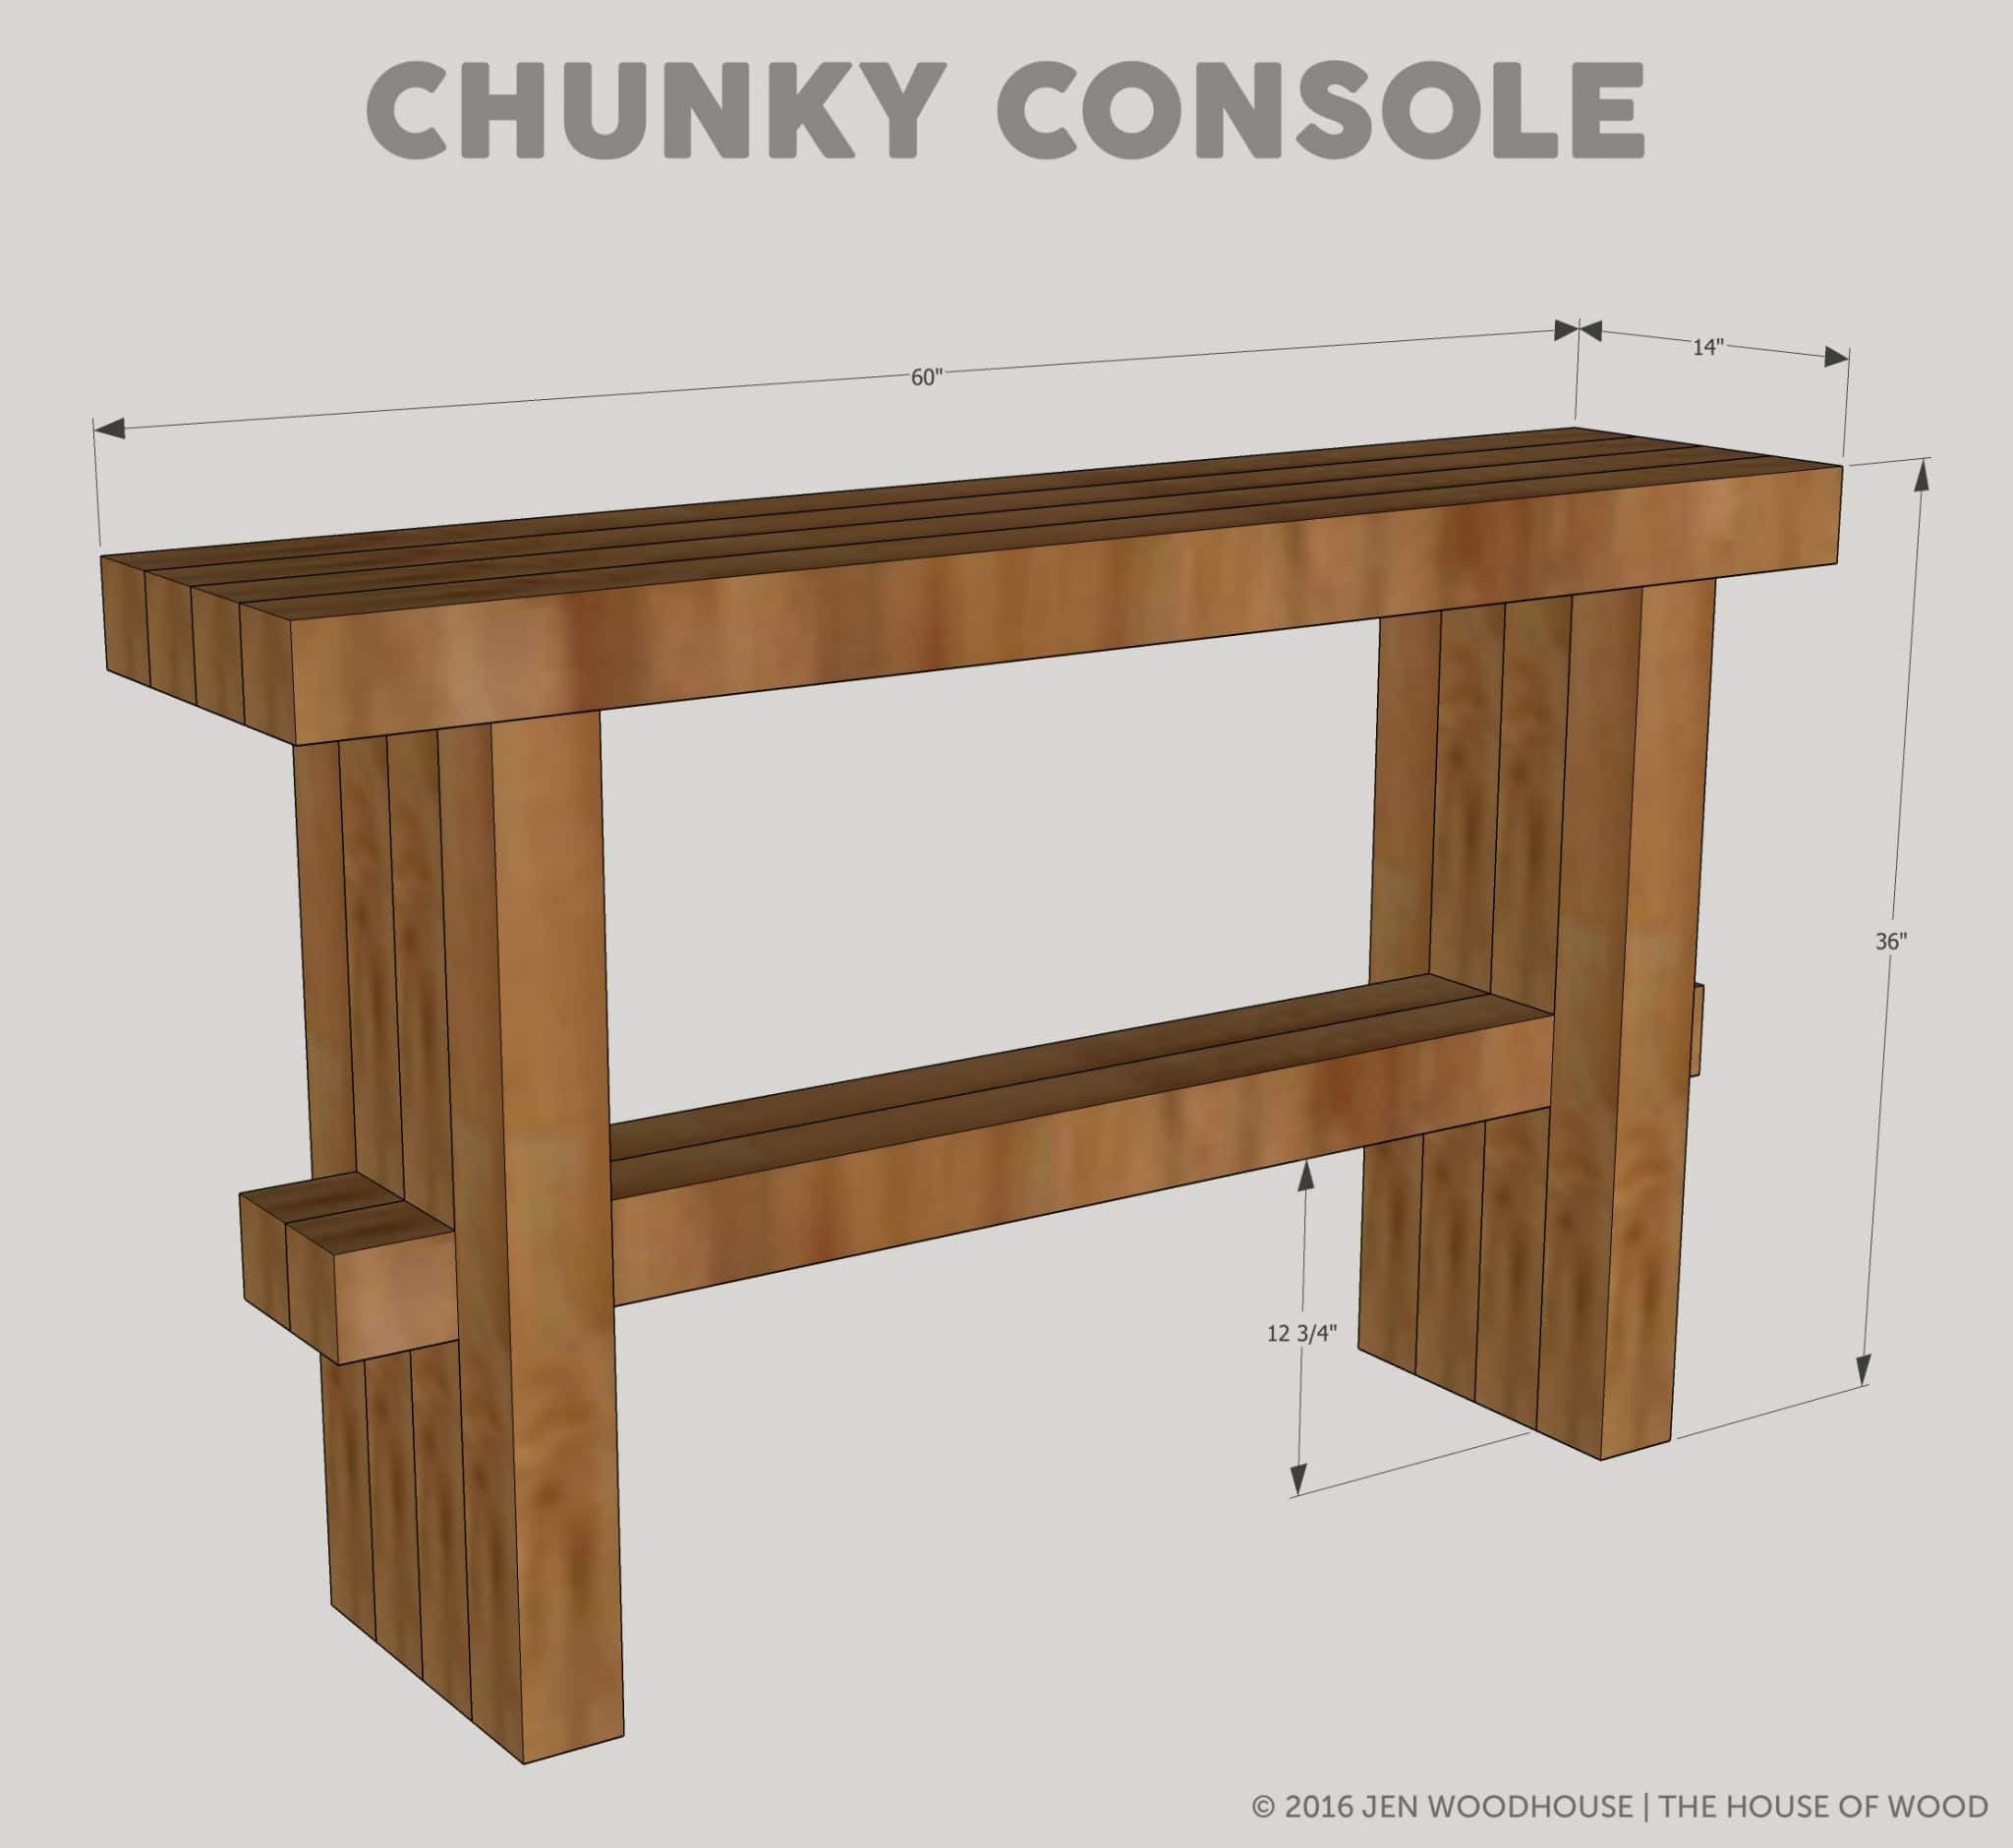 How to build a DIY Chunky 4x4 Console Table - plans by Jen Woodhouse